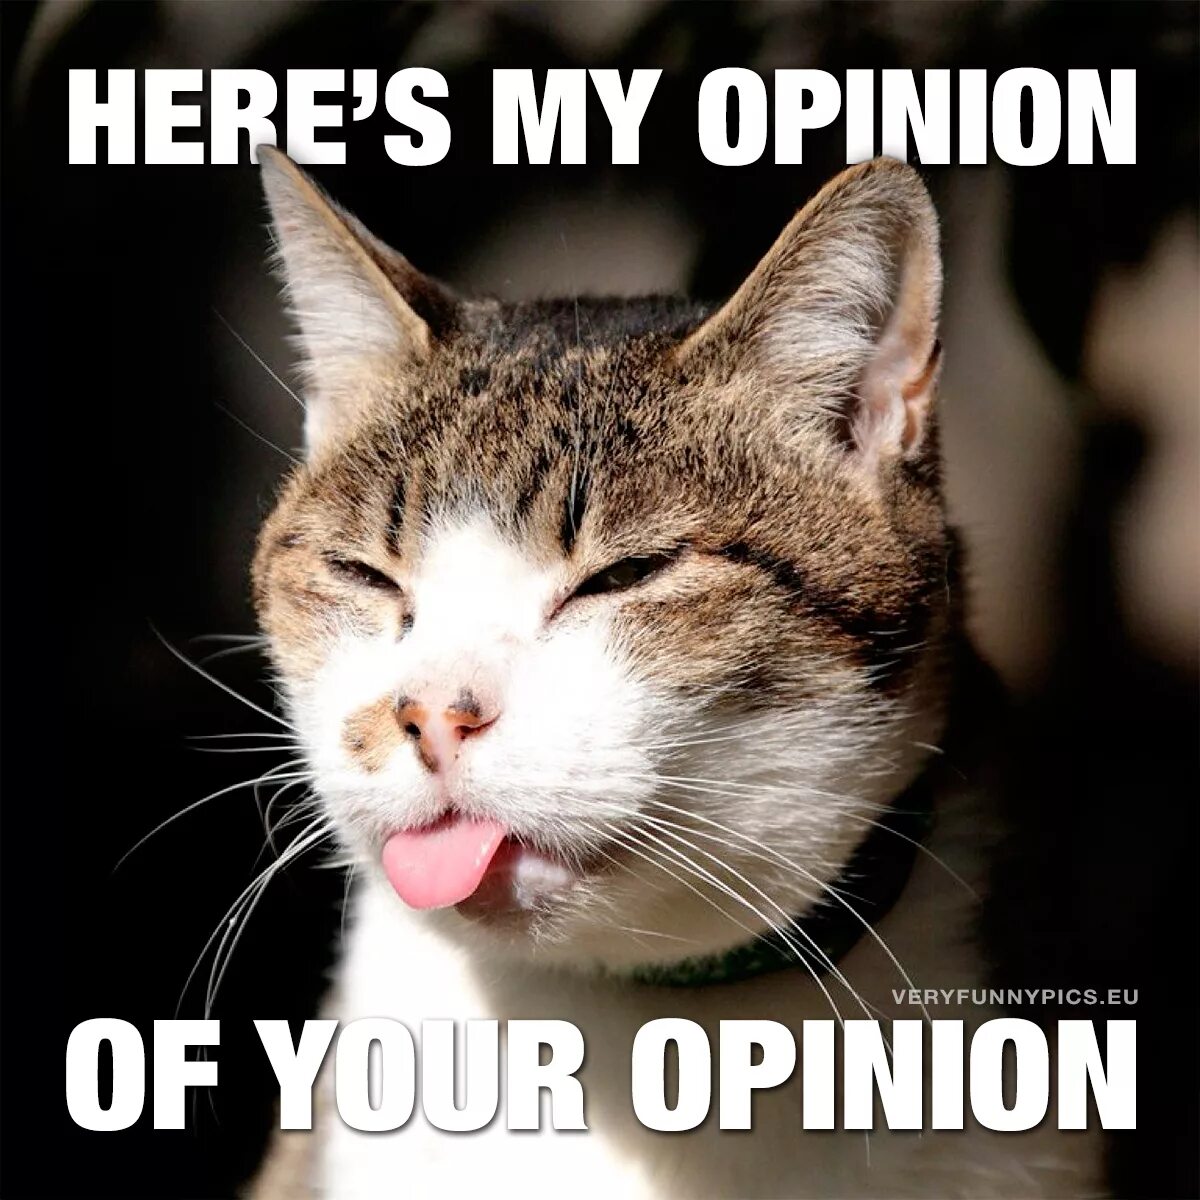 Because in my opinion. Your opinion my opinion. Картинки my opinion. Мем your opinion. Опинионс меме.